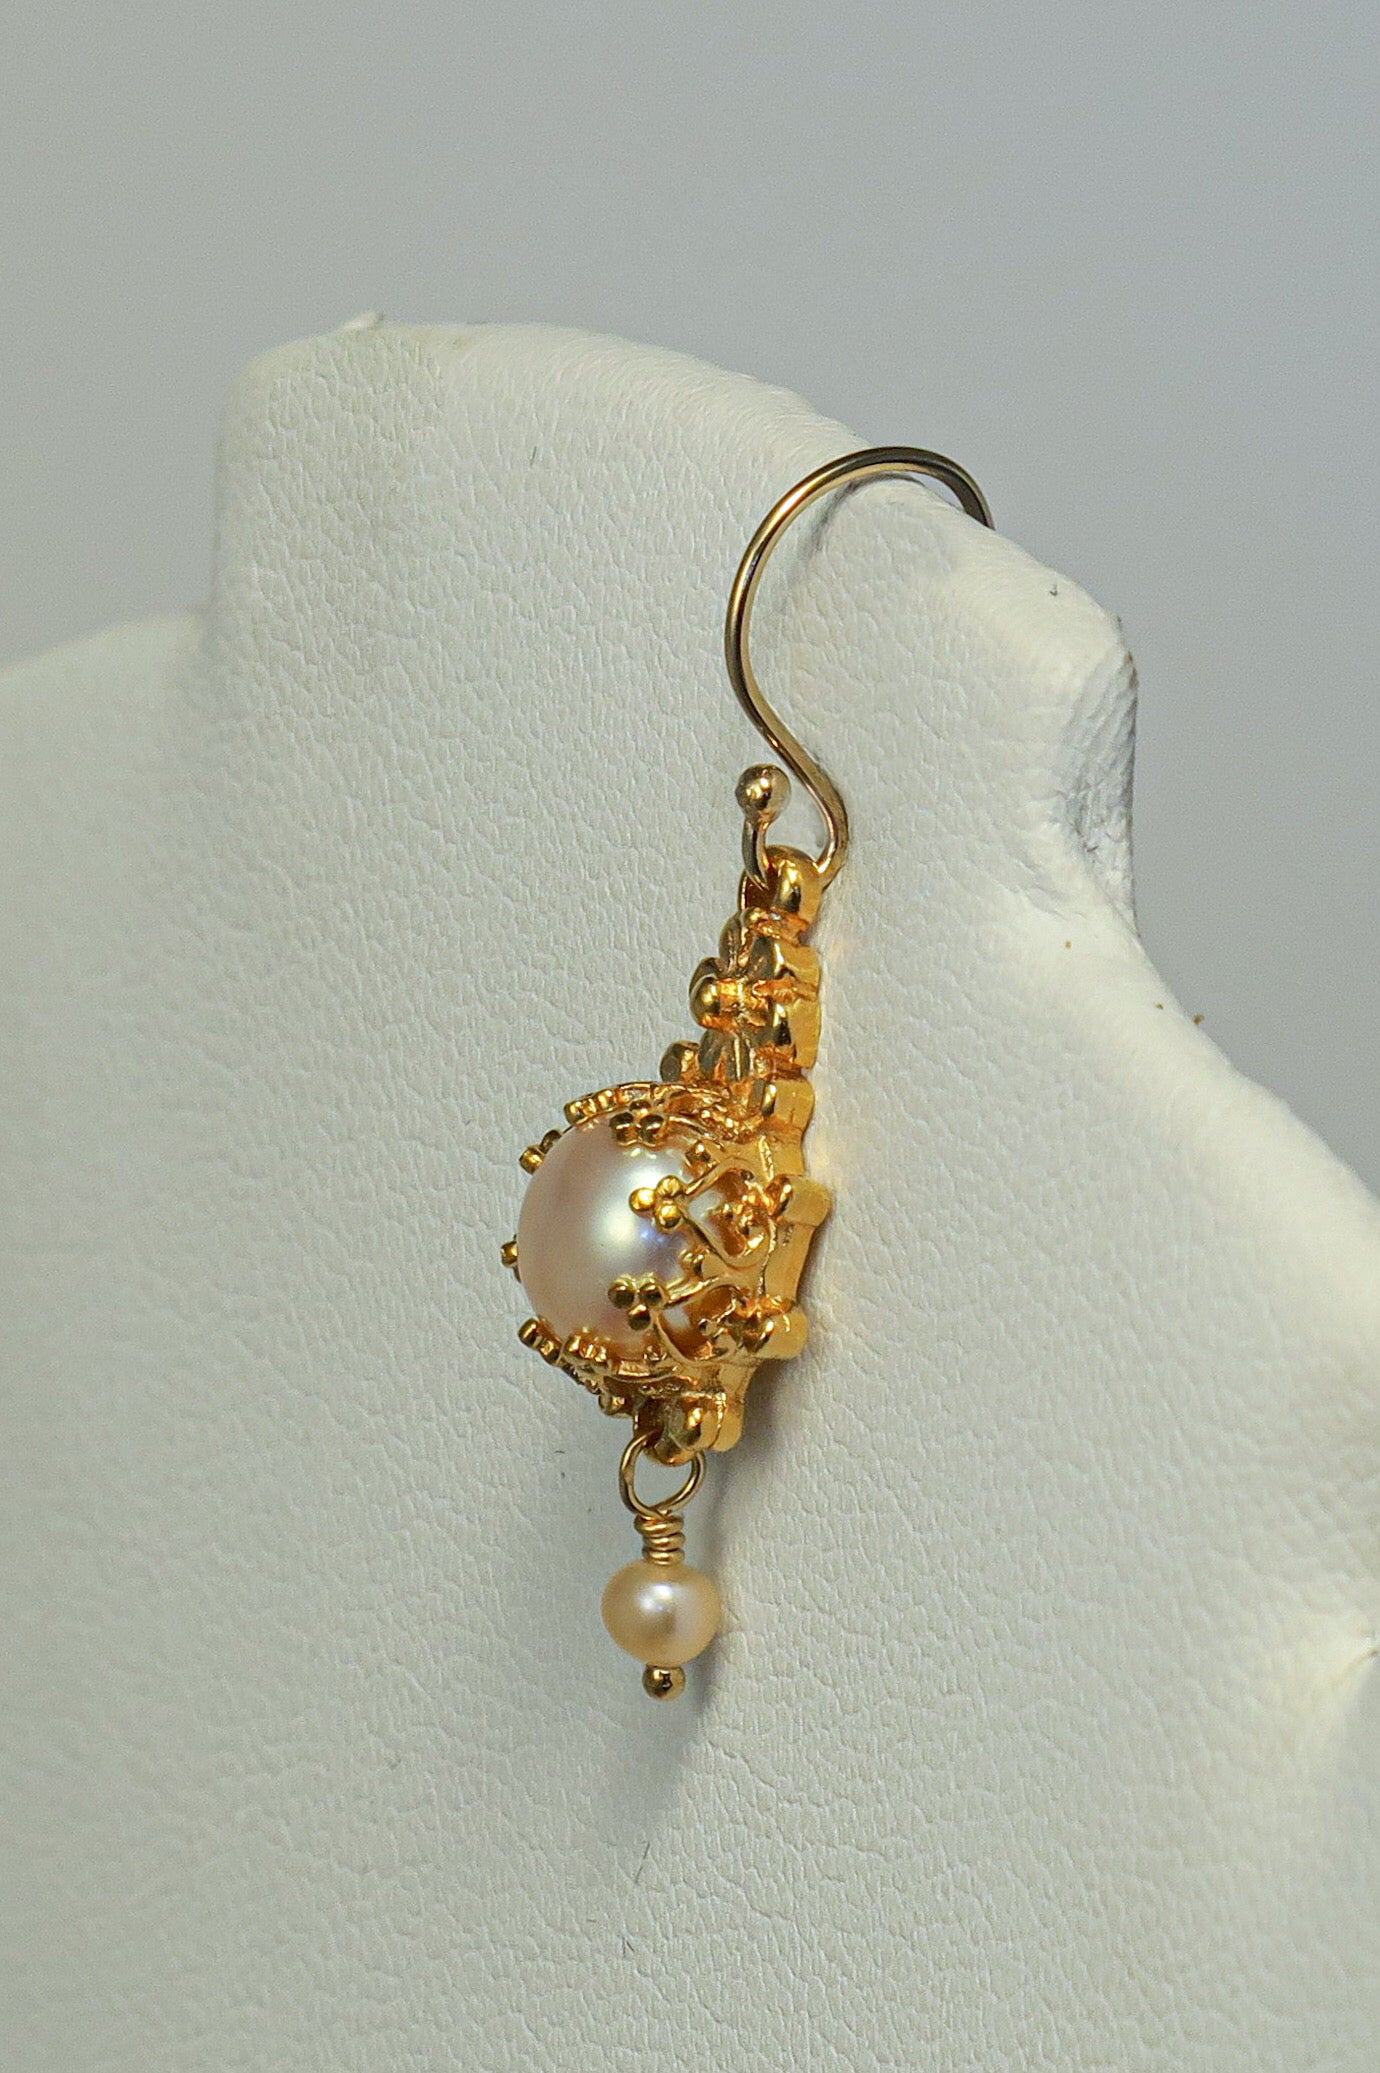 18K Gold Vermeil and Natural Color Pearls Earrings | by Vanessa Mellet